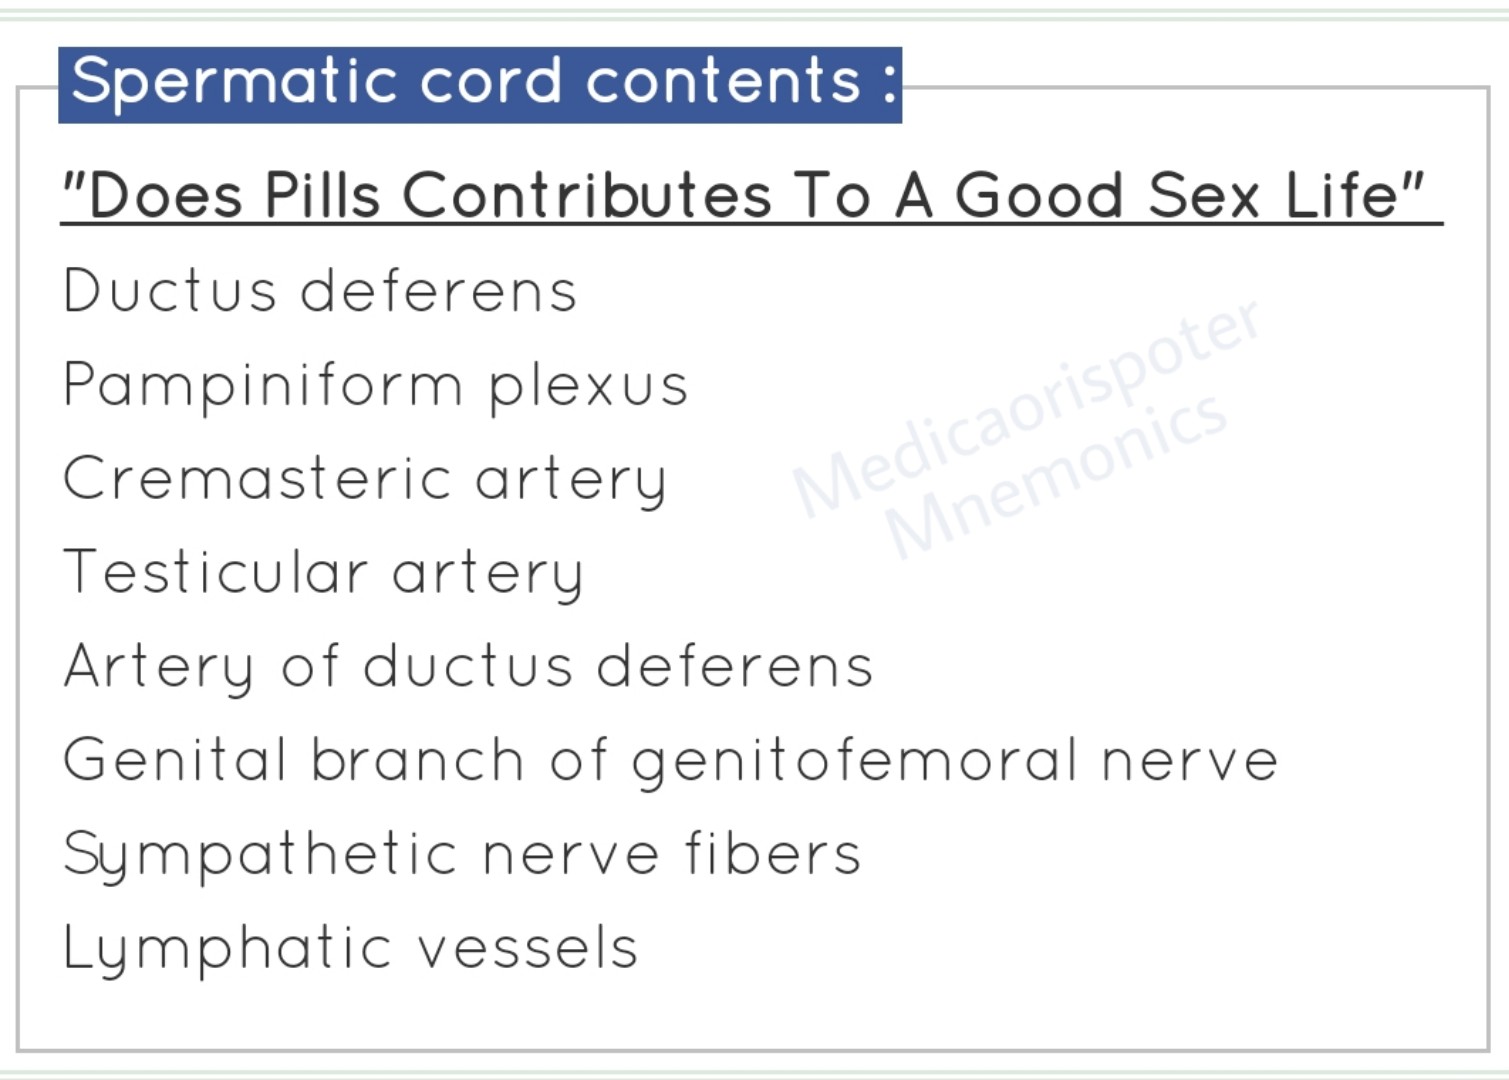 Contents of Spermatic Cord